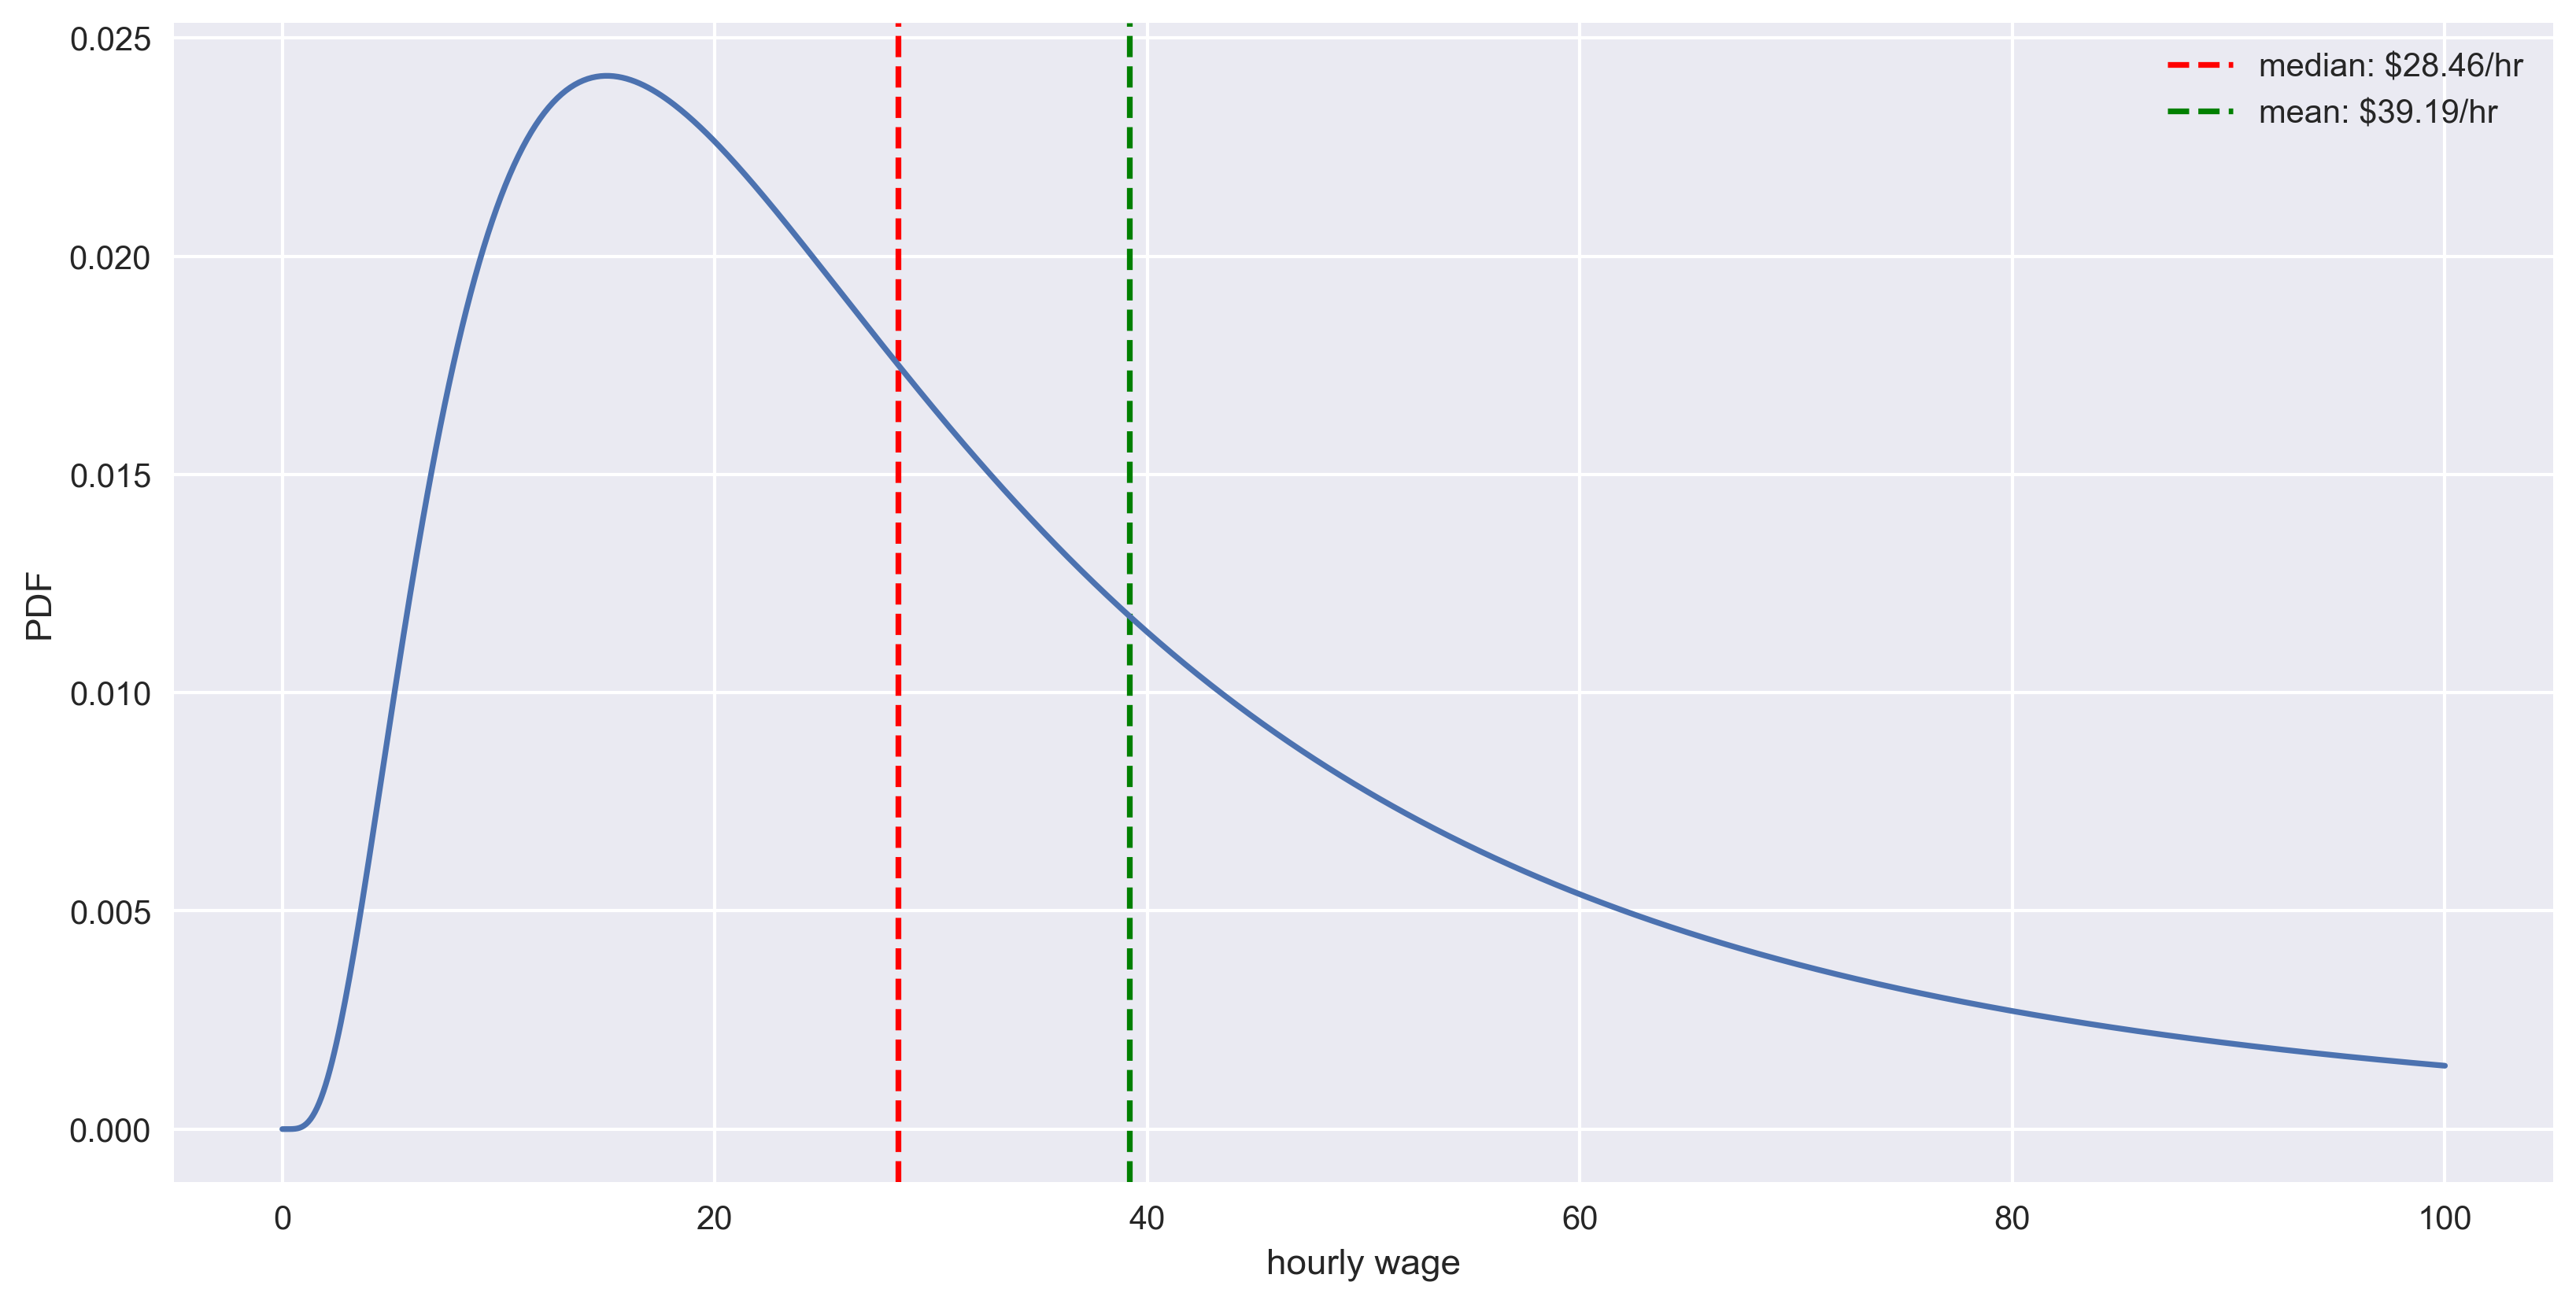 Log-normal probability distribution function based on wages